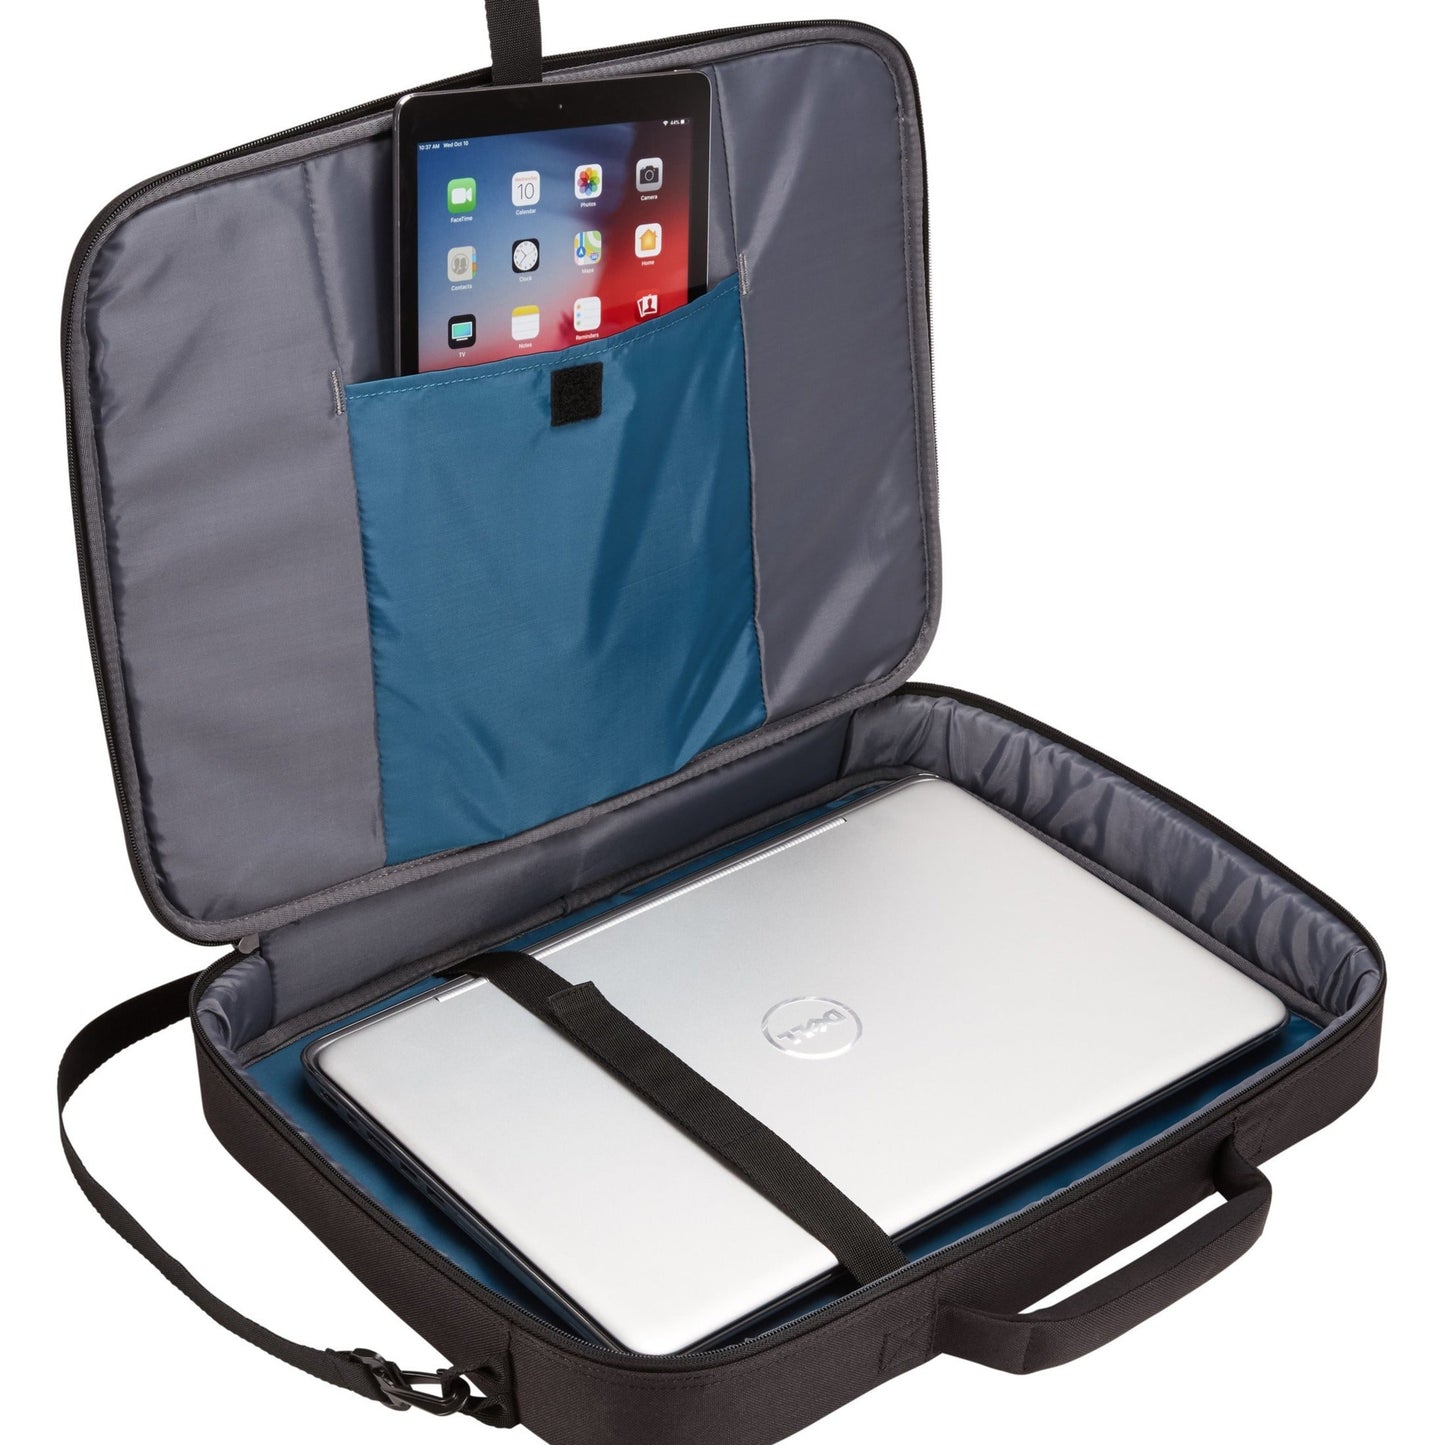 Case Logic Advantage ADVB-117 Carrying Case (Briefcase) for 10.1" to 17.3" Notebook Tablet PC Pen Electronic Device - Black